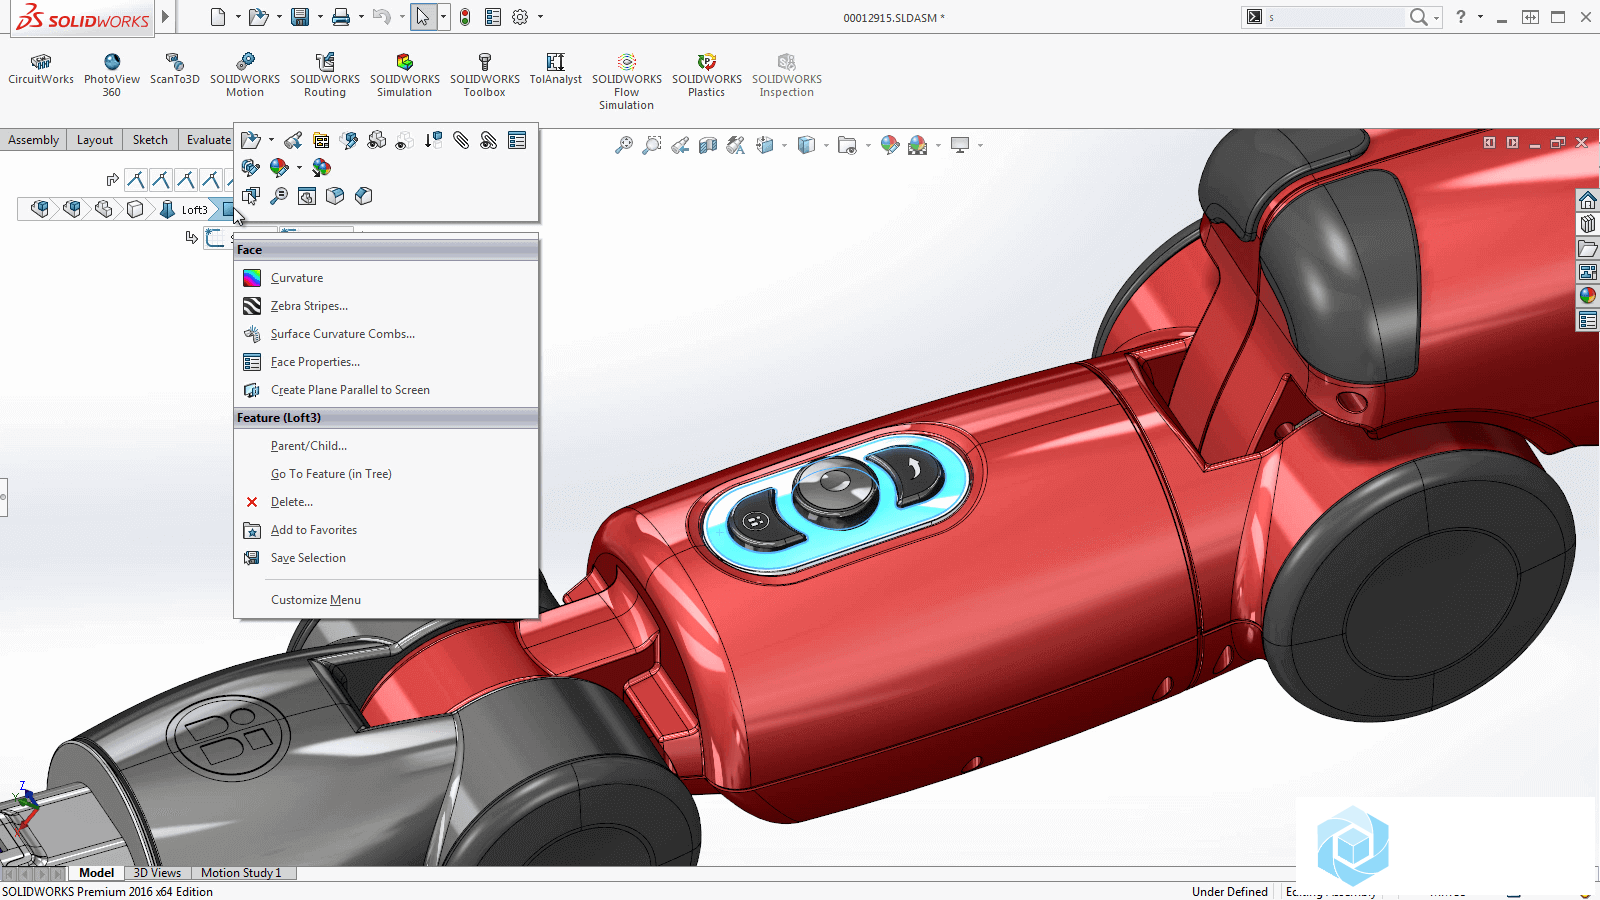 solidworks download free 2012